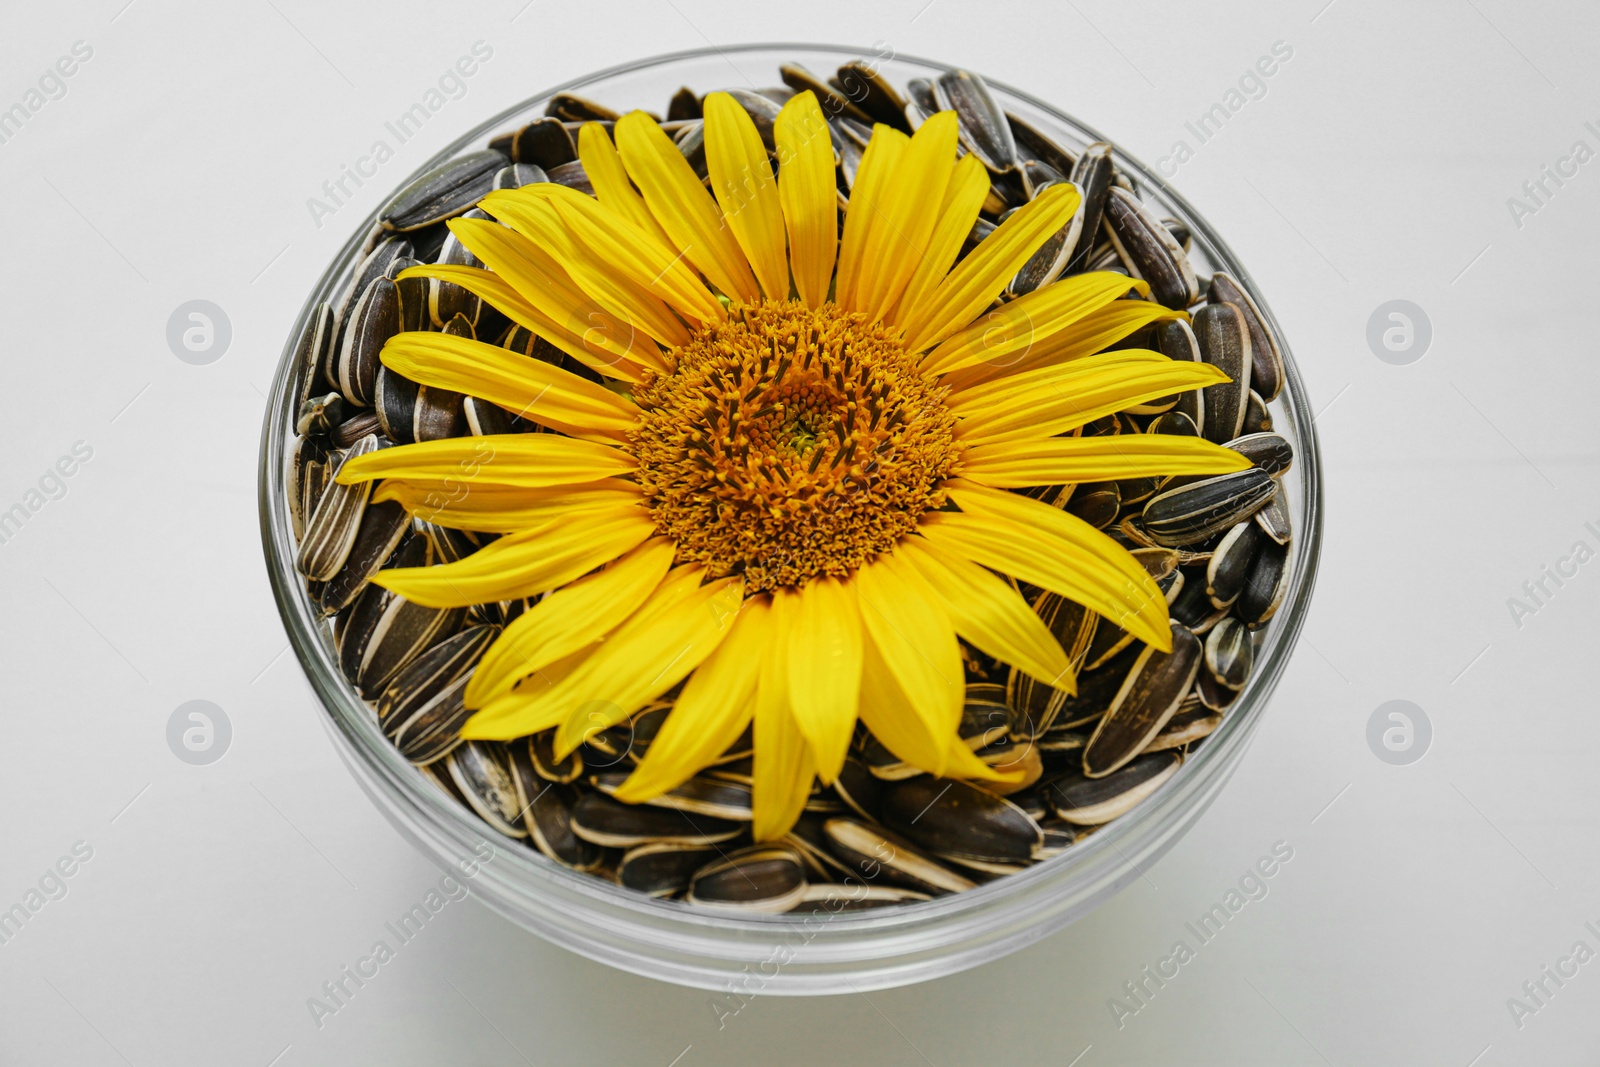 Photo of Bowl with sunflower and seeds on white background, closeup